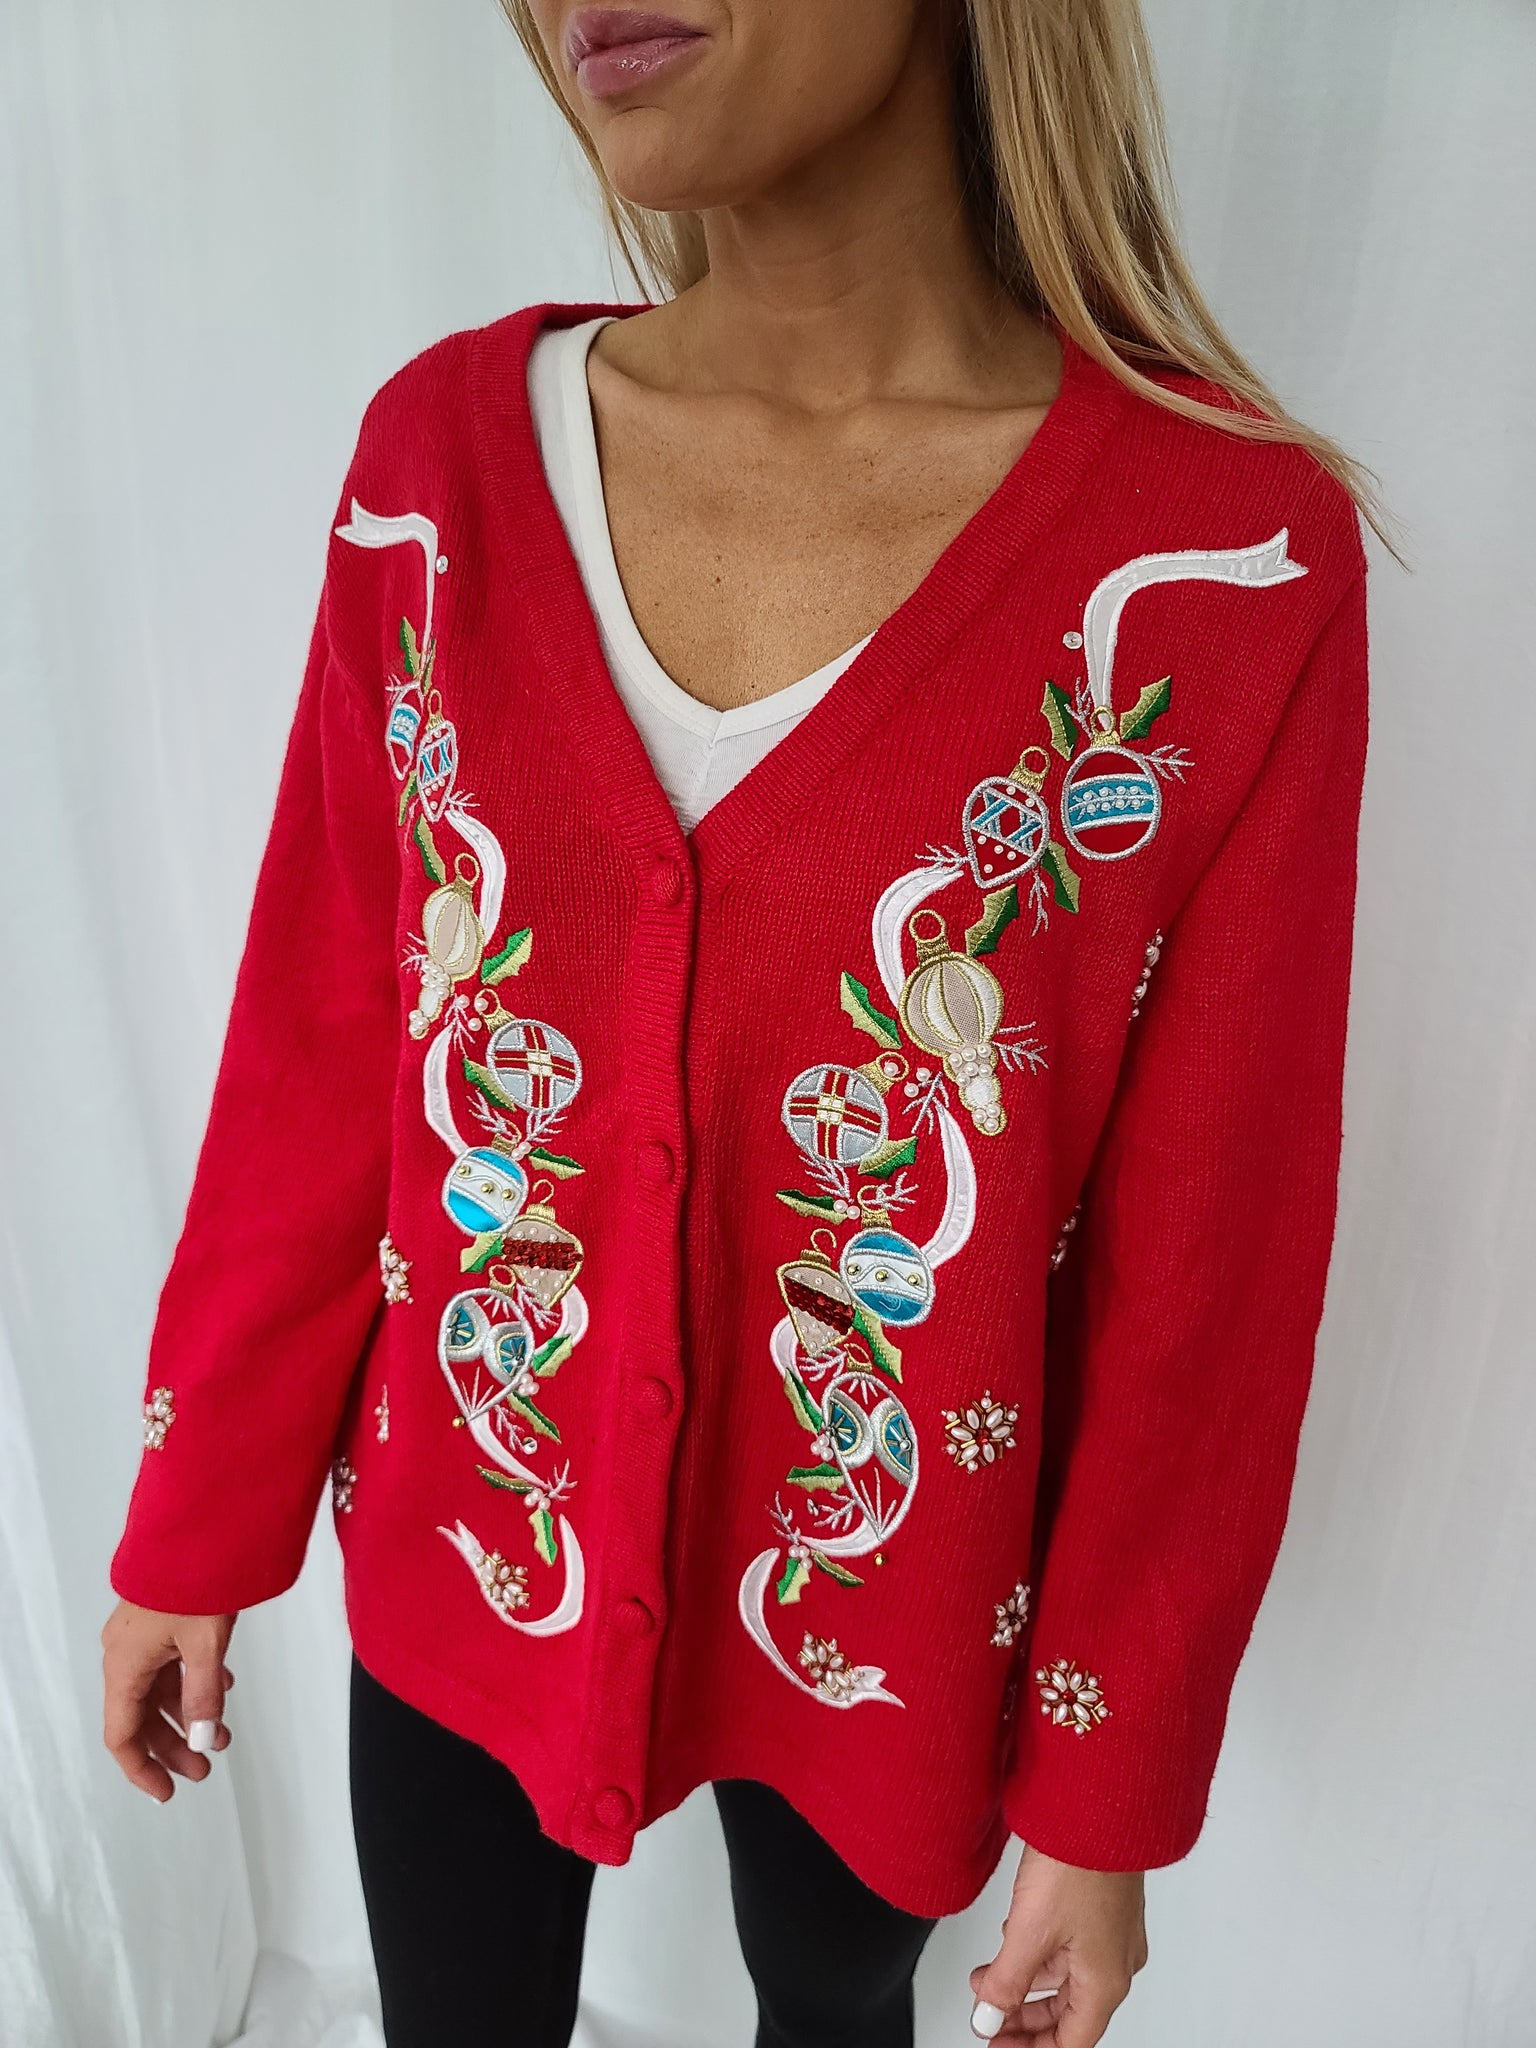 Ornaments and Snowflakes Red Button up V-neck Christmas Sweater